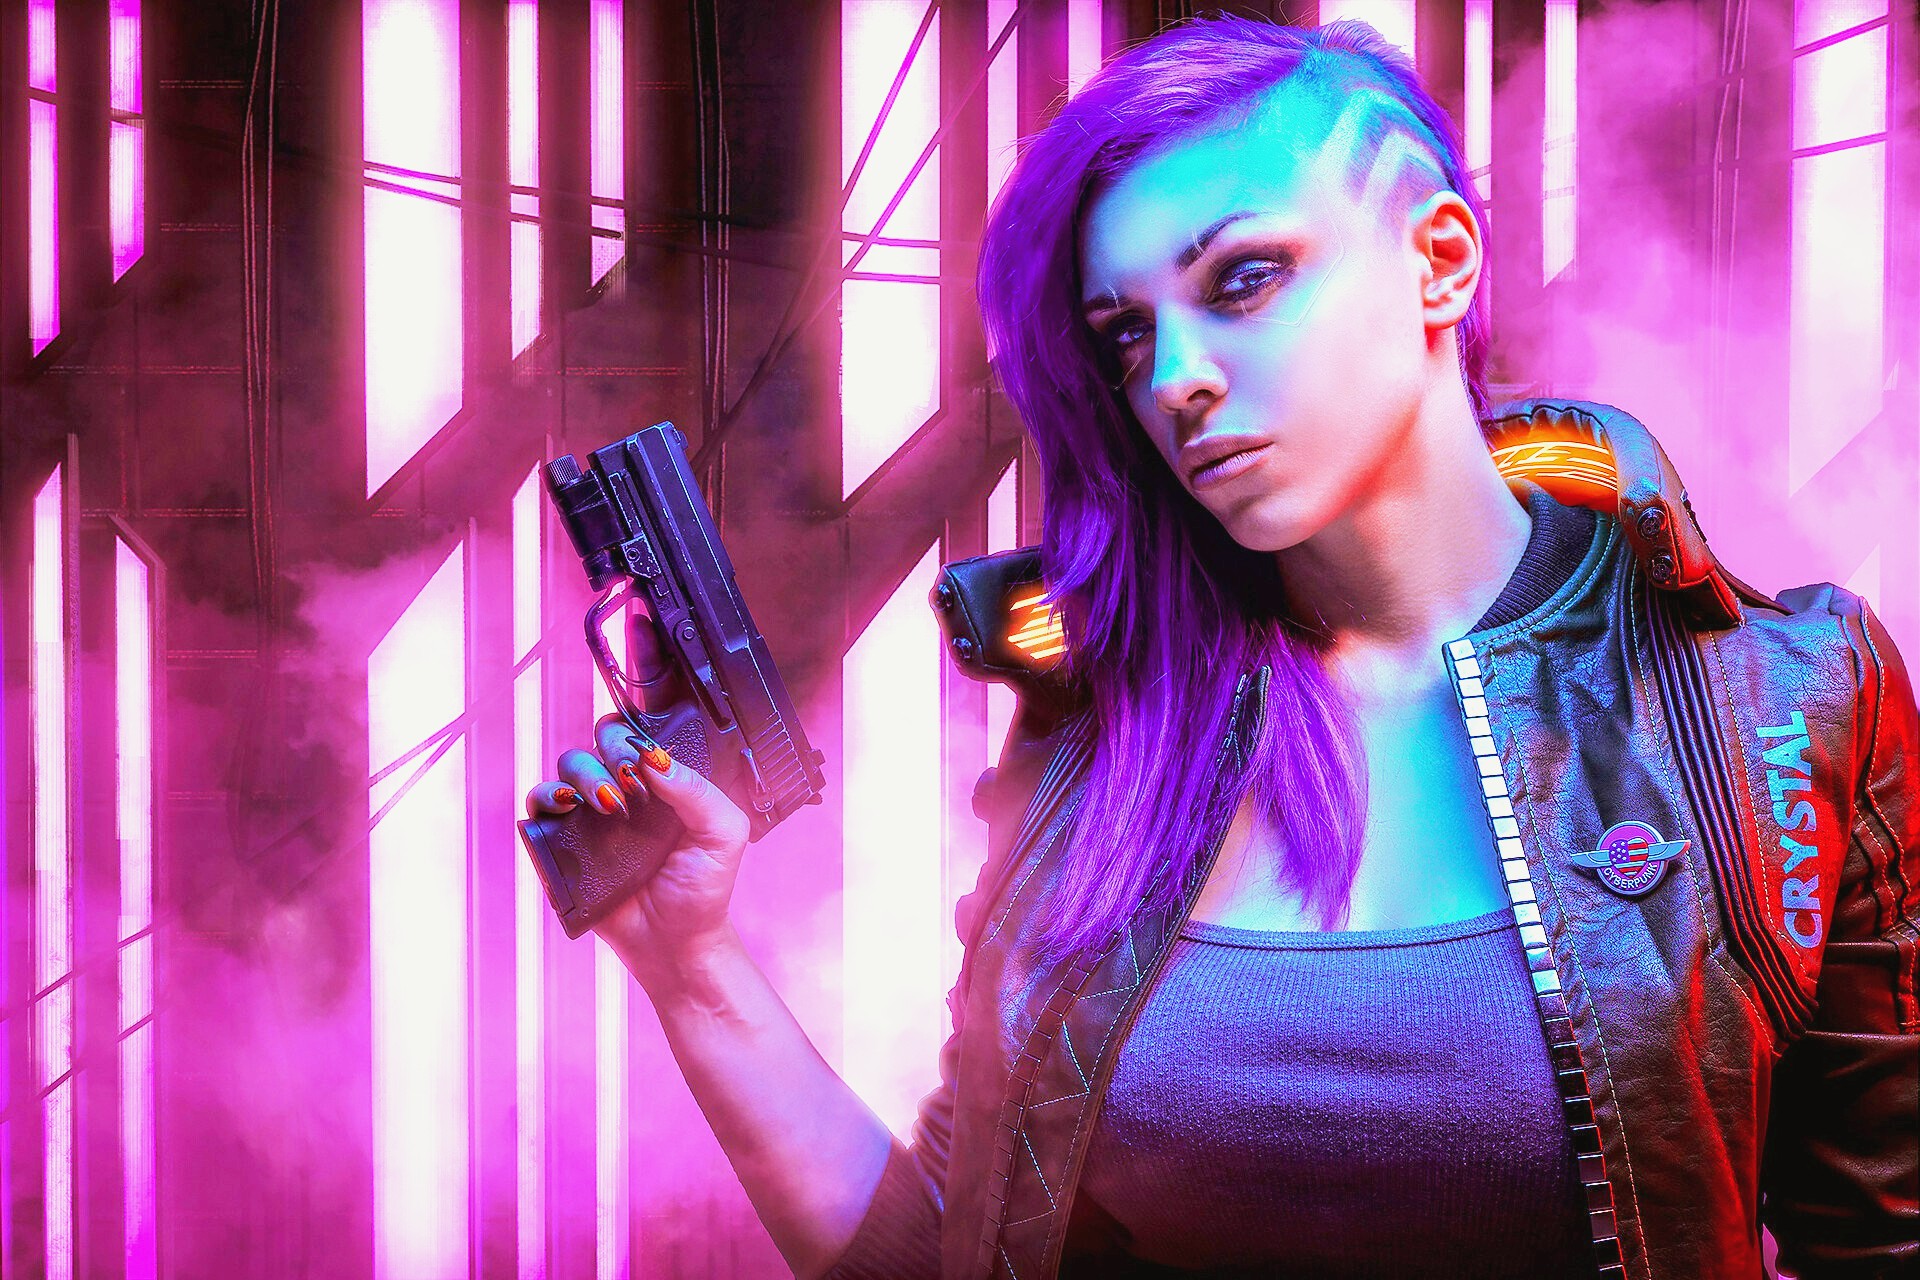 This Cyberpunk 2077 makes smart weapons smarter